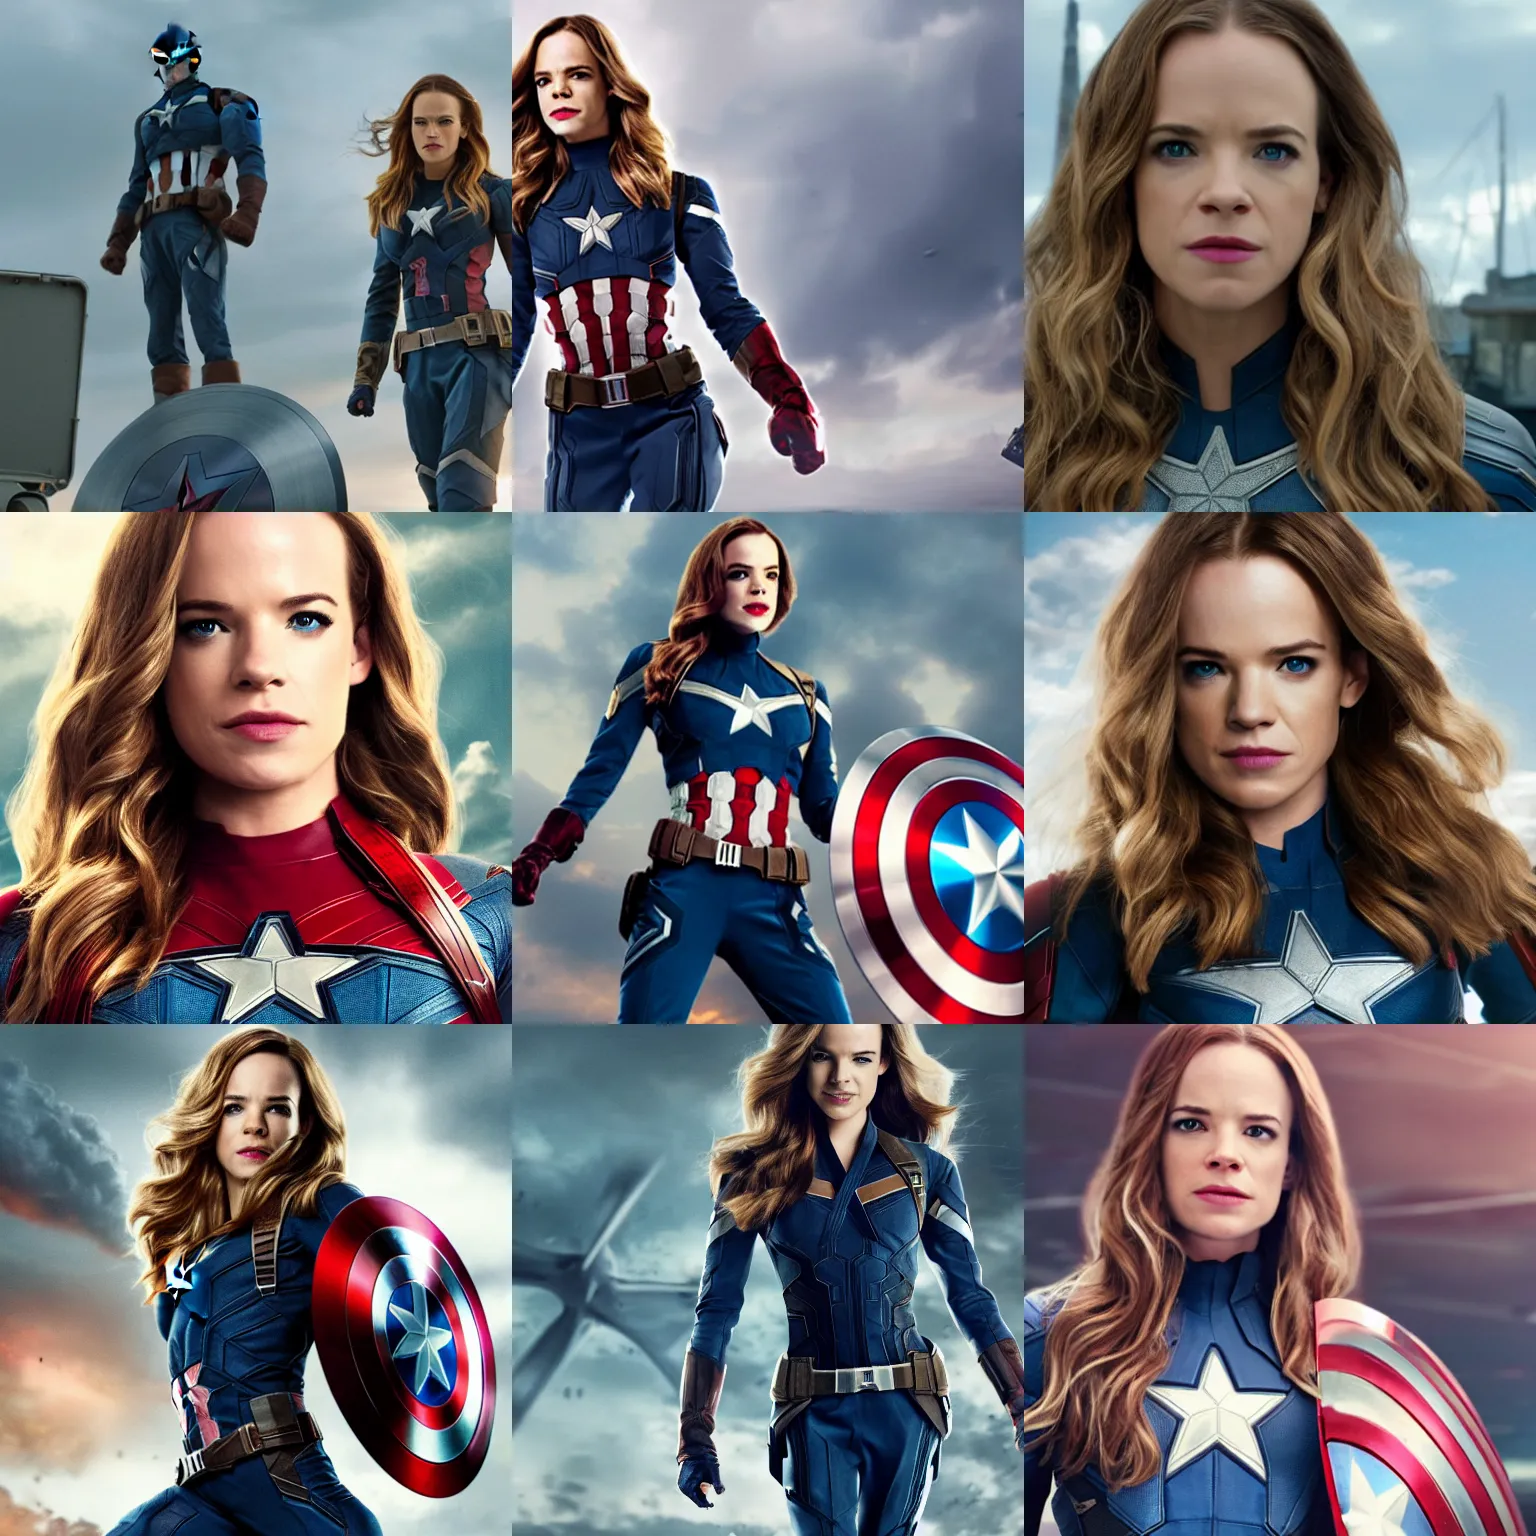 Prompt: Danielle Panabaker as Captain America, promotional film still from The Avengers, 4k, high quality, detailed